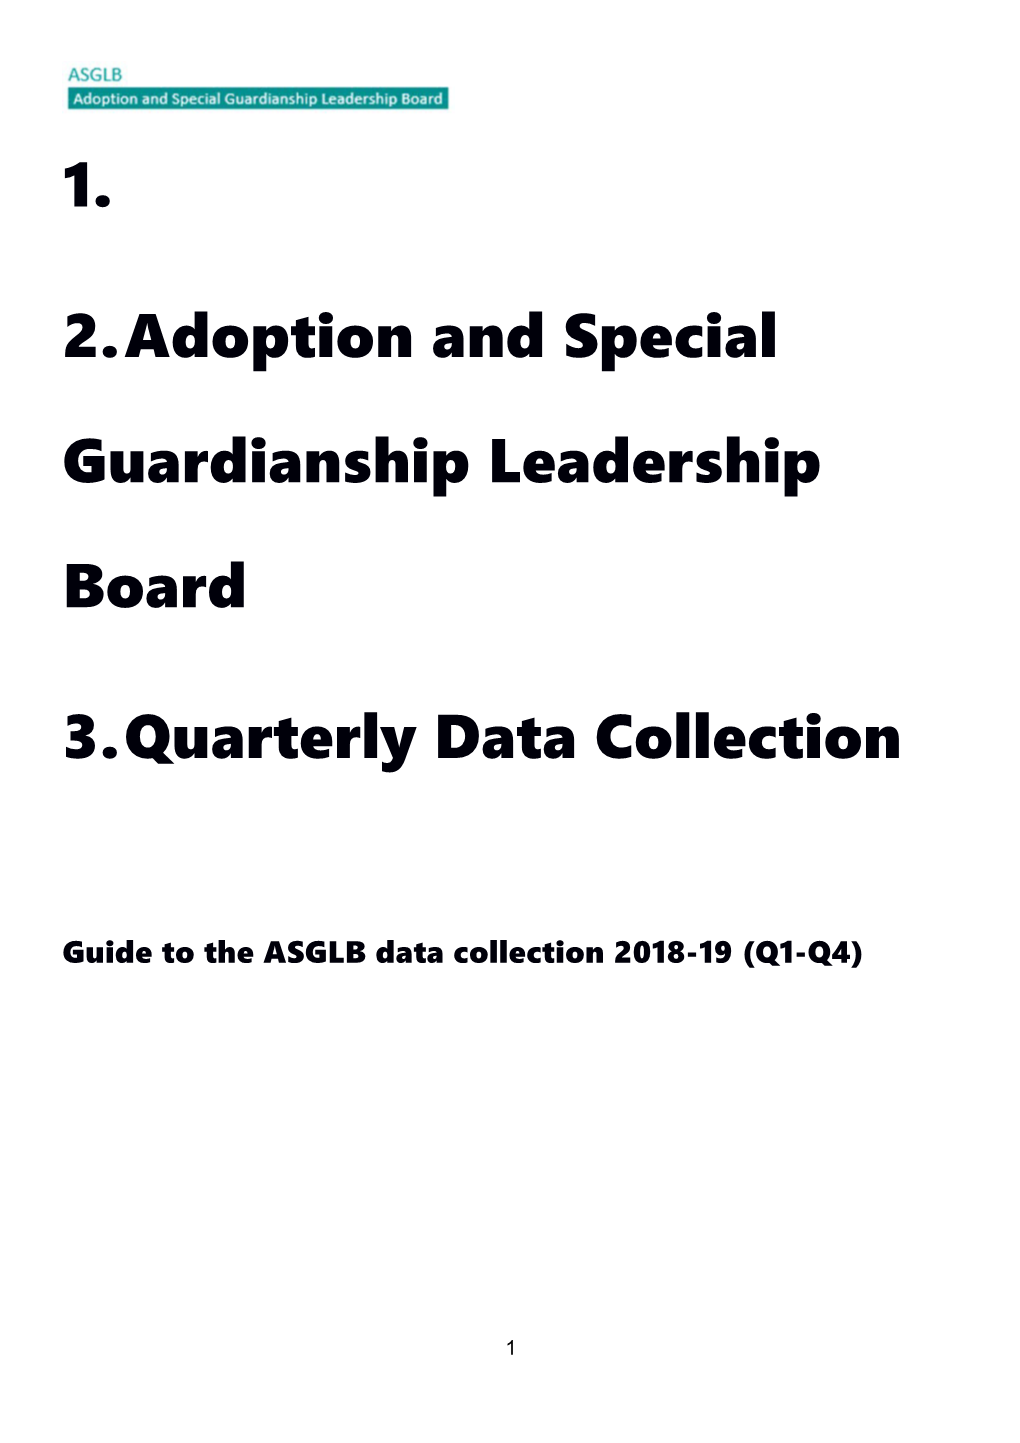 Adoption and Special Guardianship Leadership Board